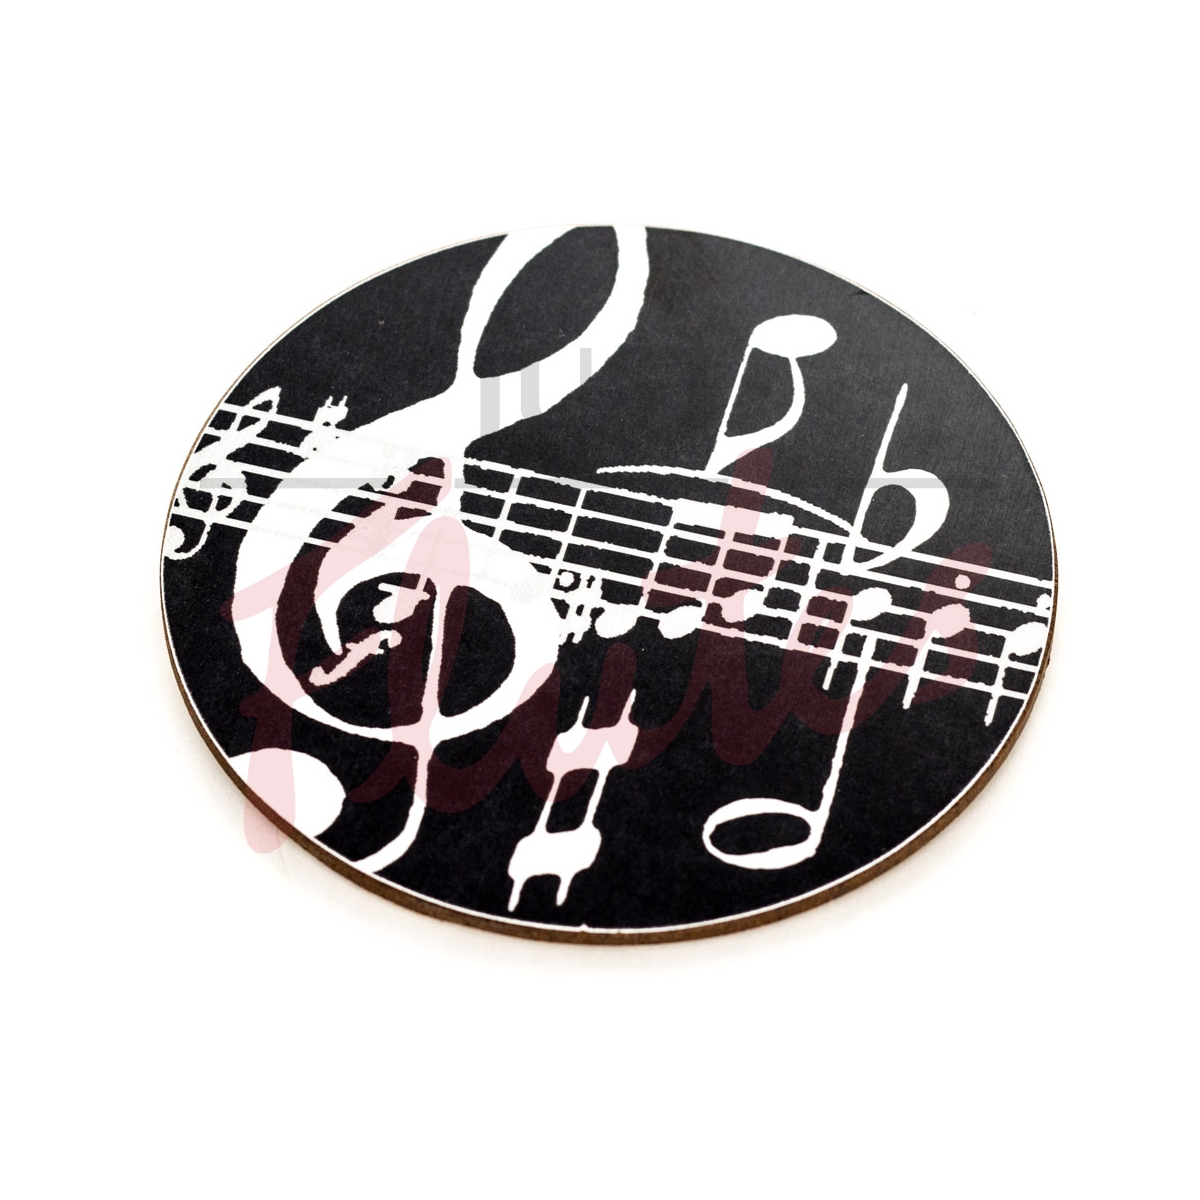 Music Mug Mats - Black with White Music Notes Design (Pack of 2)